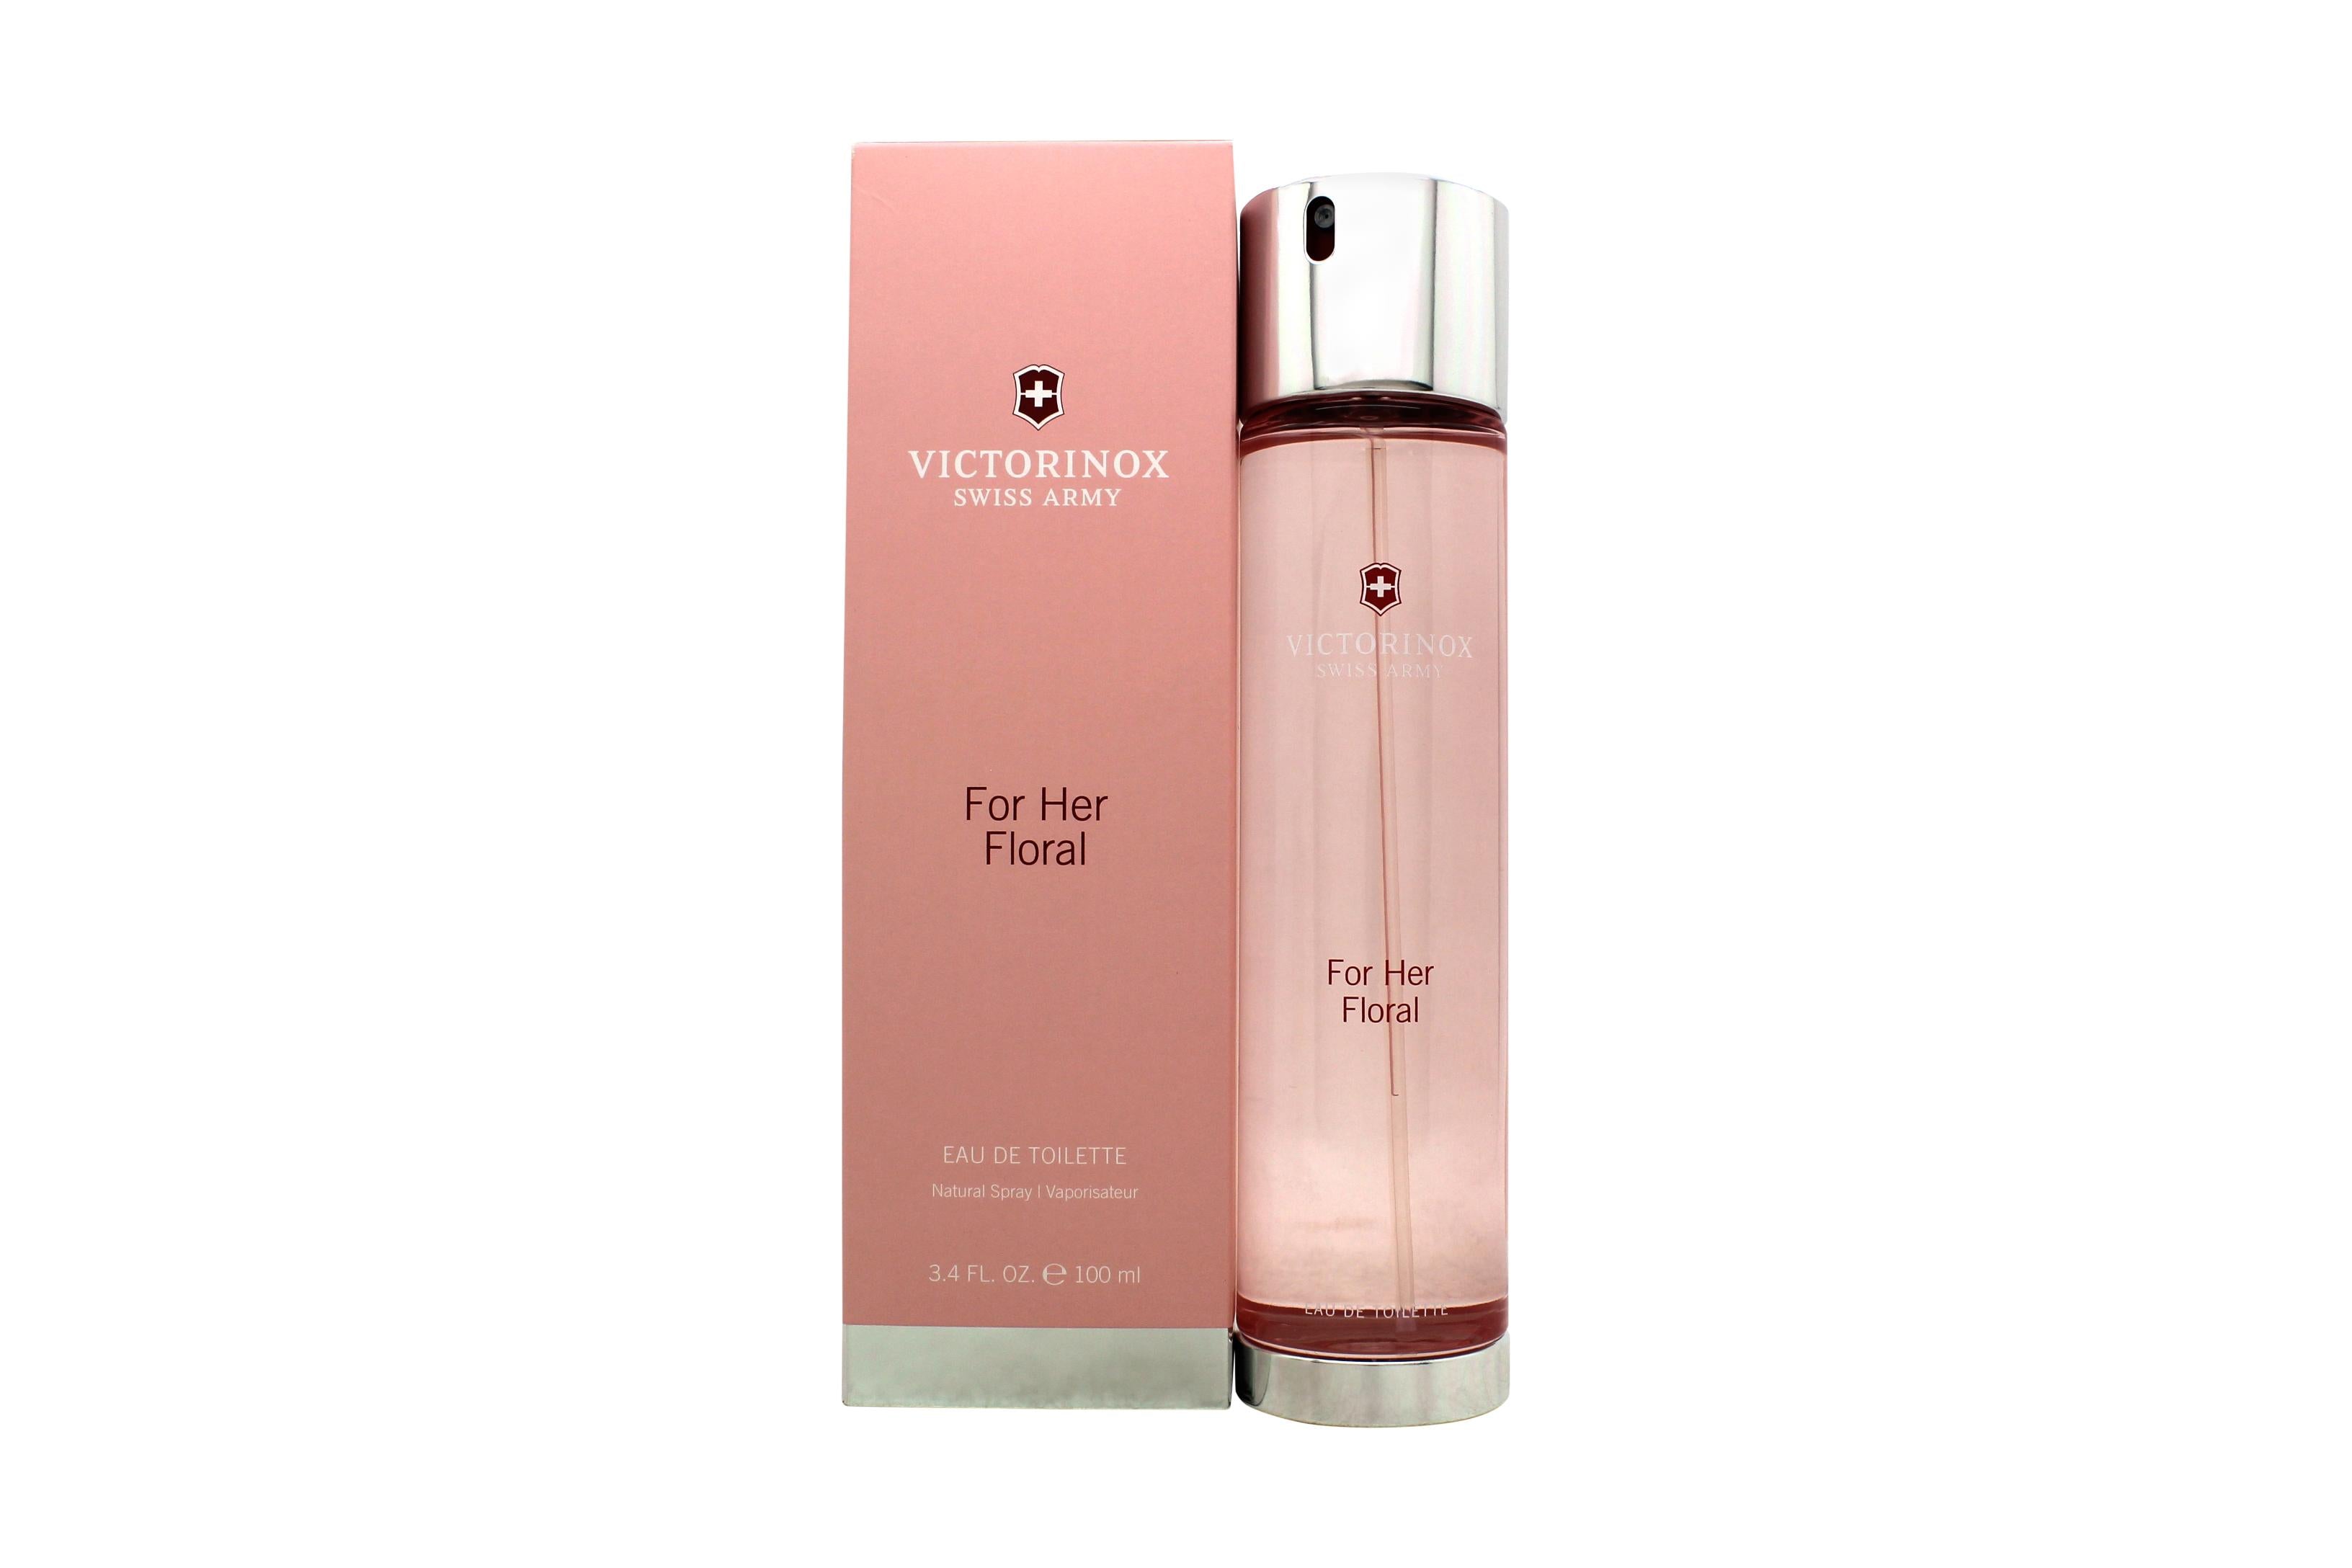 View Swiss Army For Her Floral Eau de Toilette 100ml Spray information